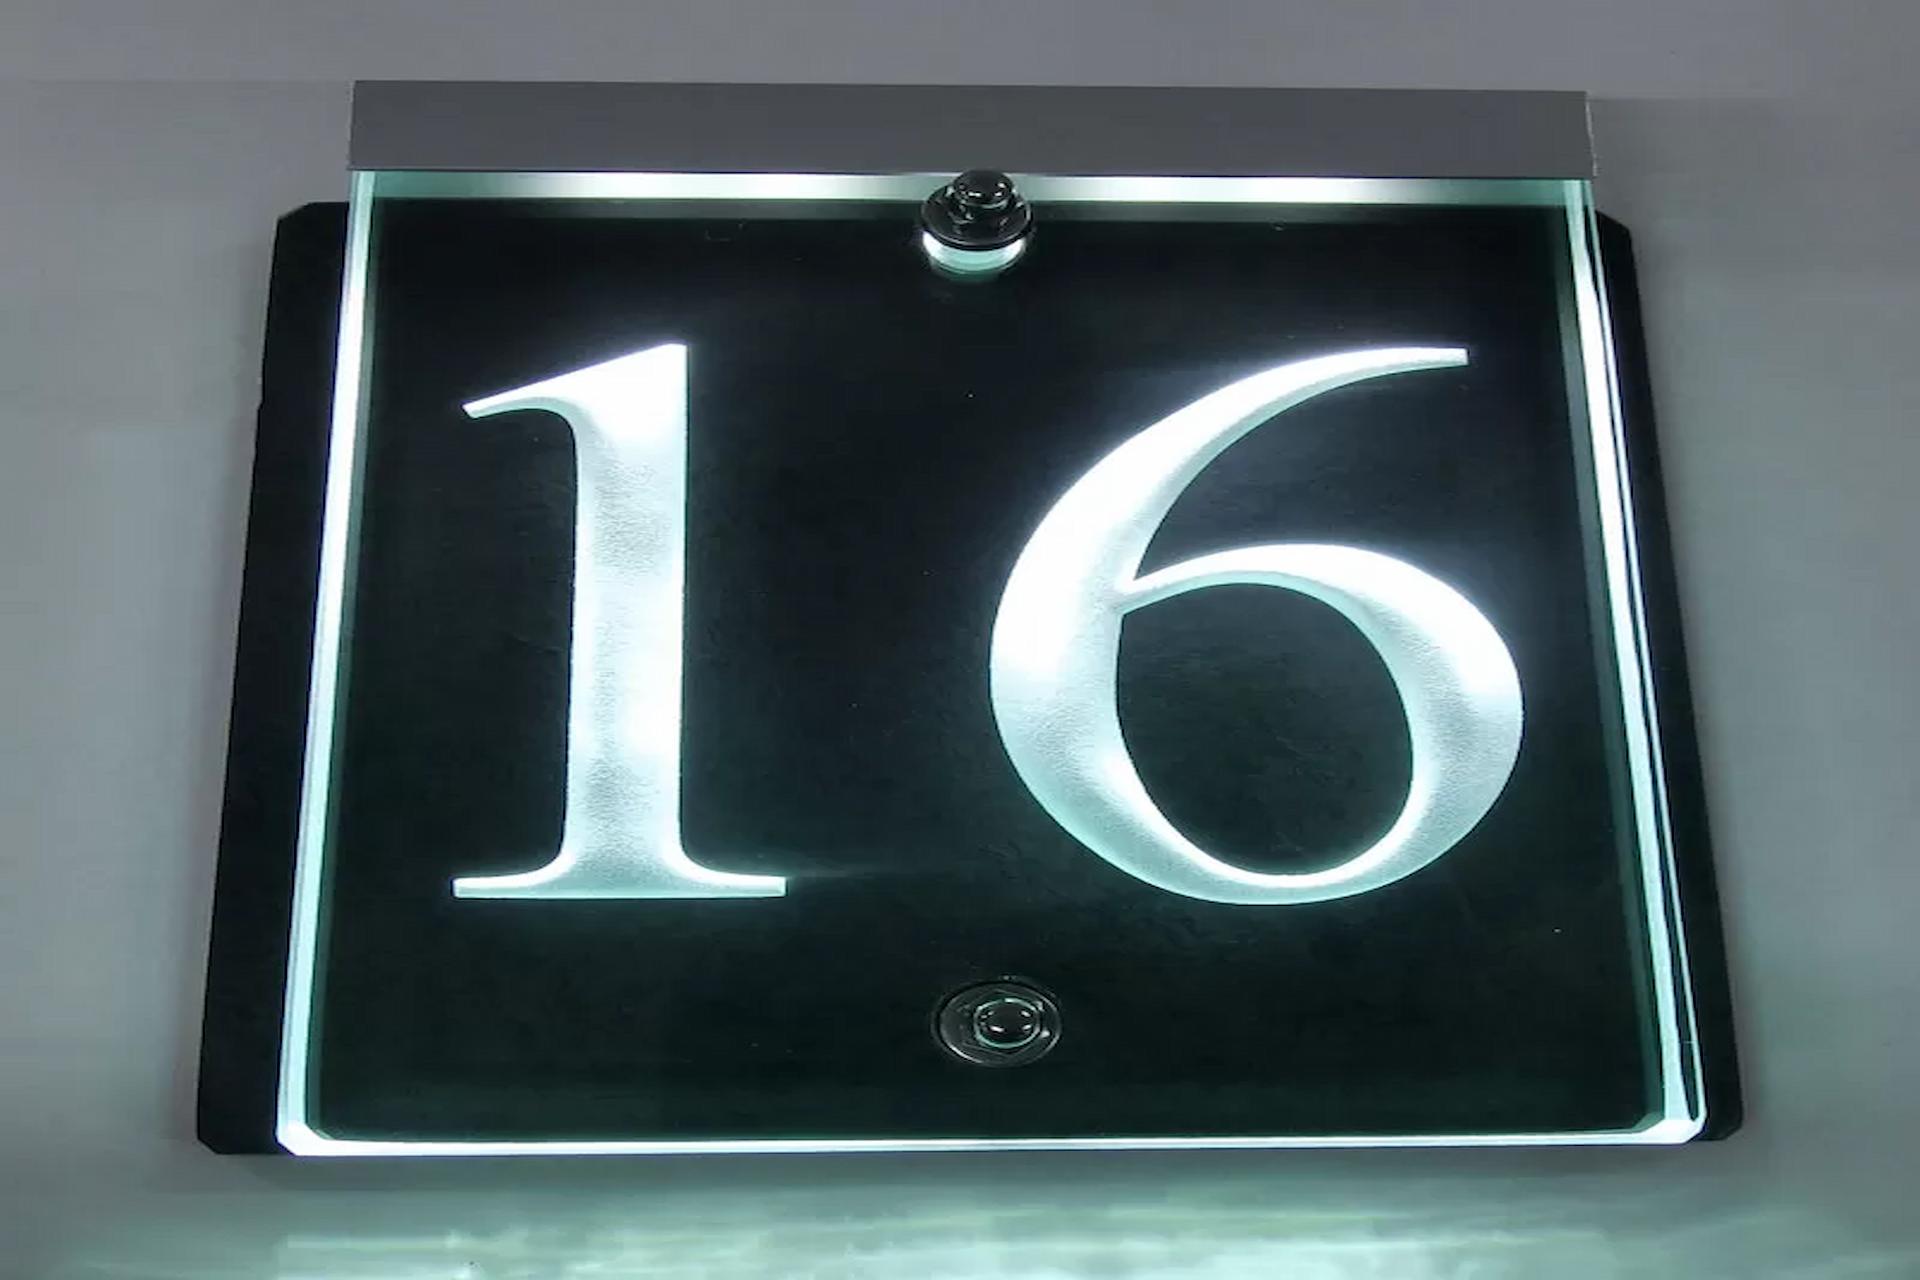 Why Every Office Should Have An Illuminated Address Plaque